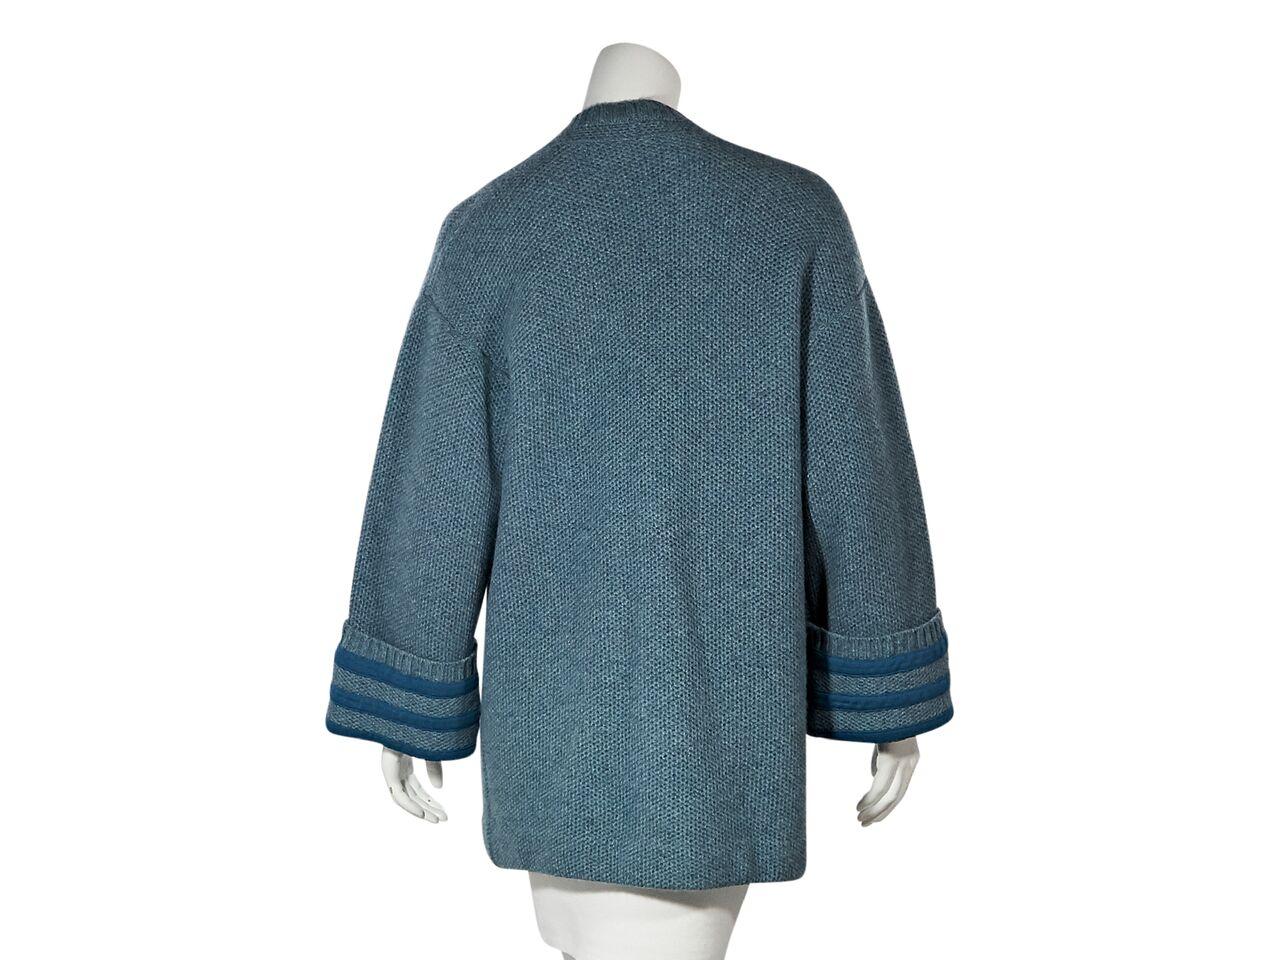 Product details:  Blue cashmere cardigan by Chanel.  Deep v-neck.  Long sleeves.  Striped cuffs.  Button-front closure.   Patch front pockets.  42